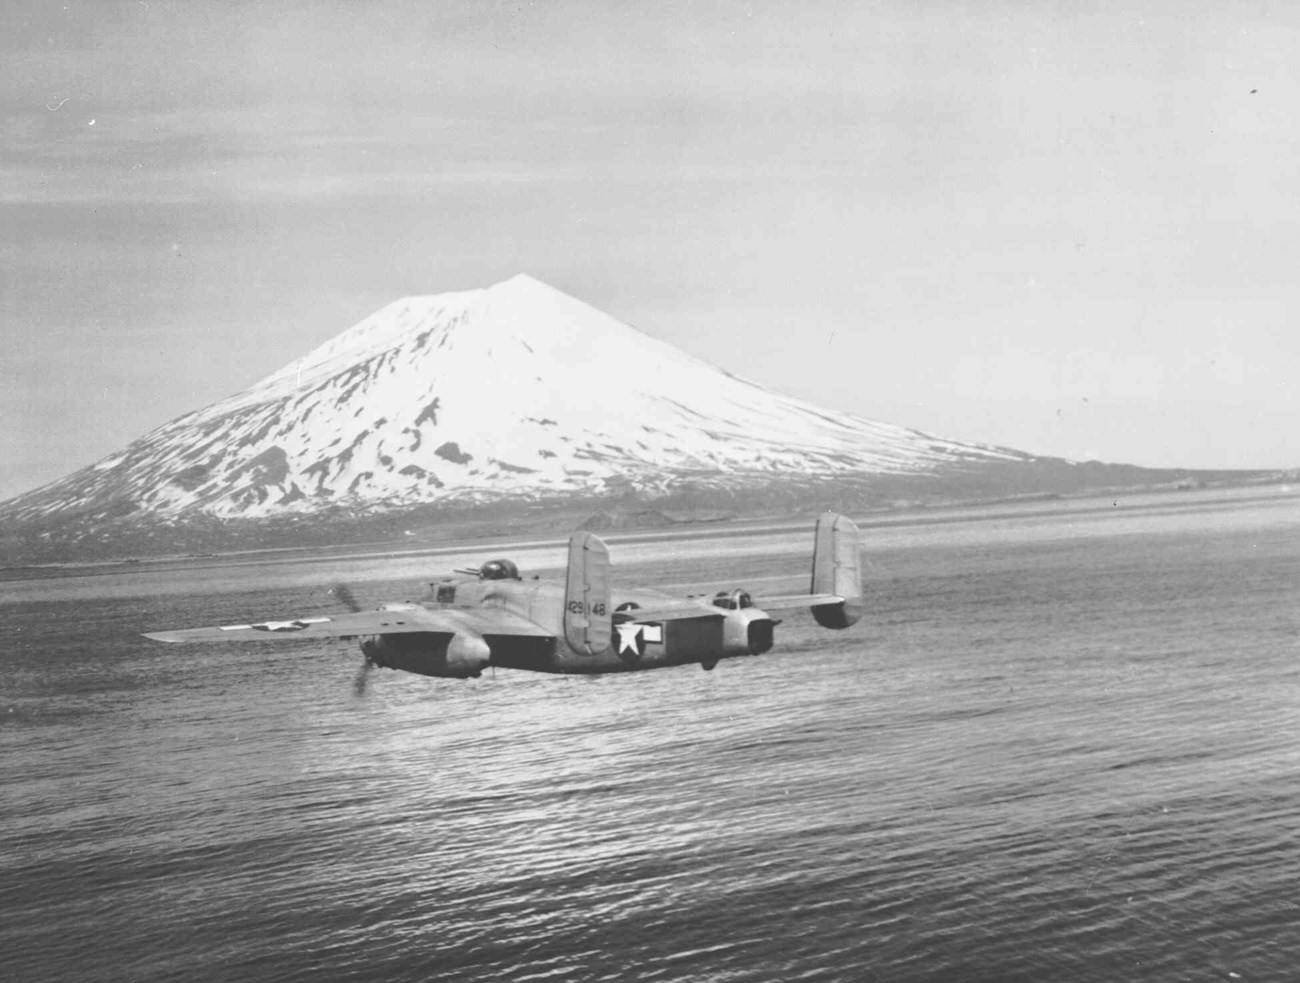 Plane flying over open water with snow-capped mountain in distance.